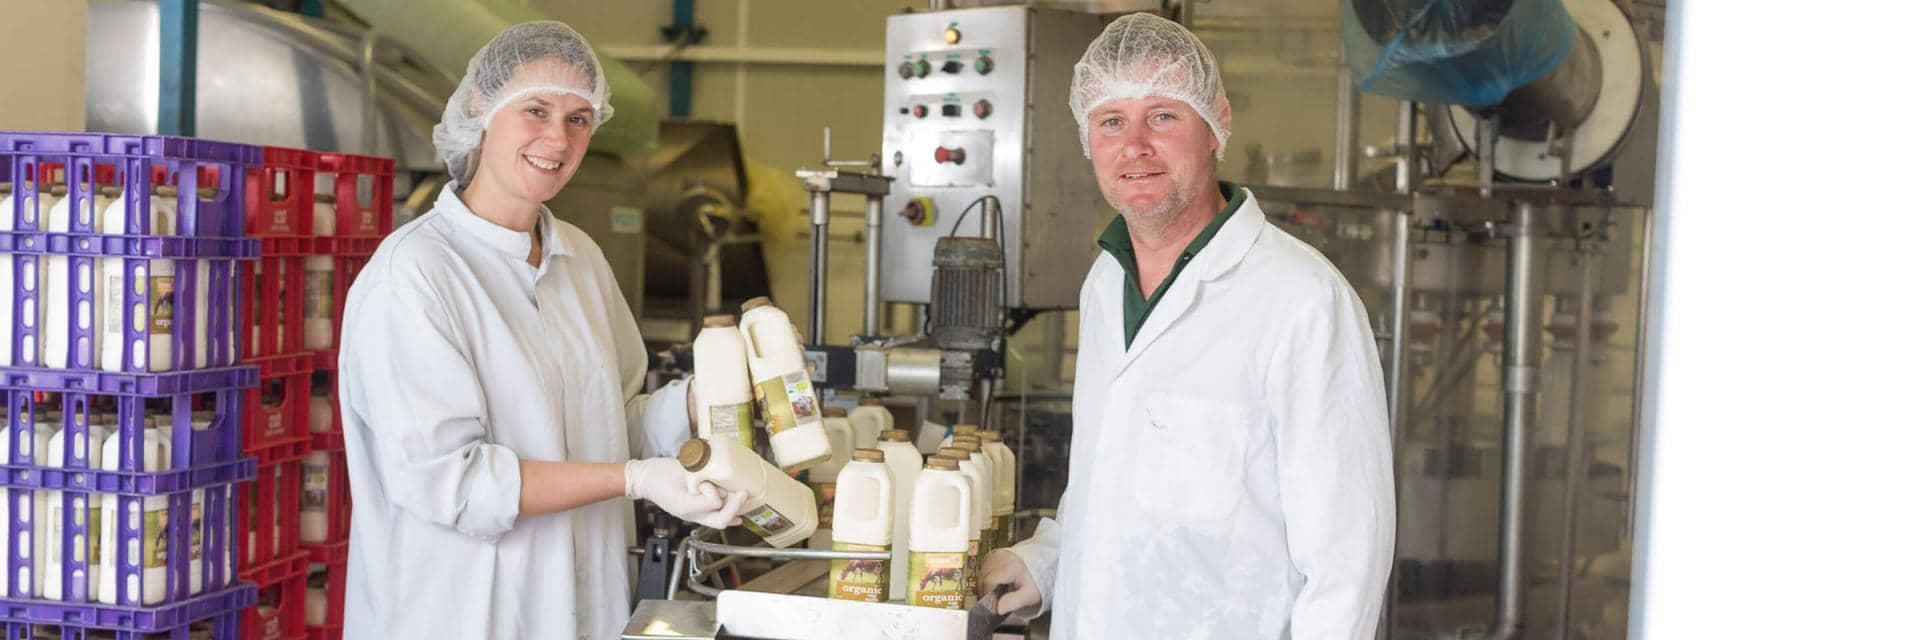  A woman and a man dressed in overalls hold up bottles of milk that have just come off the dairy production line